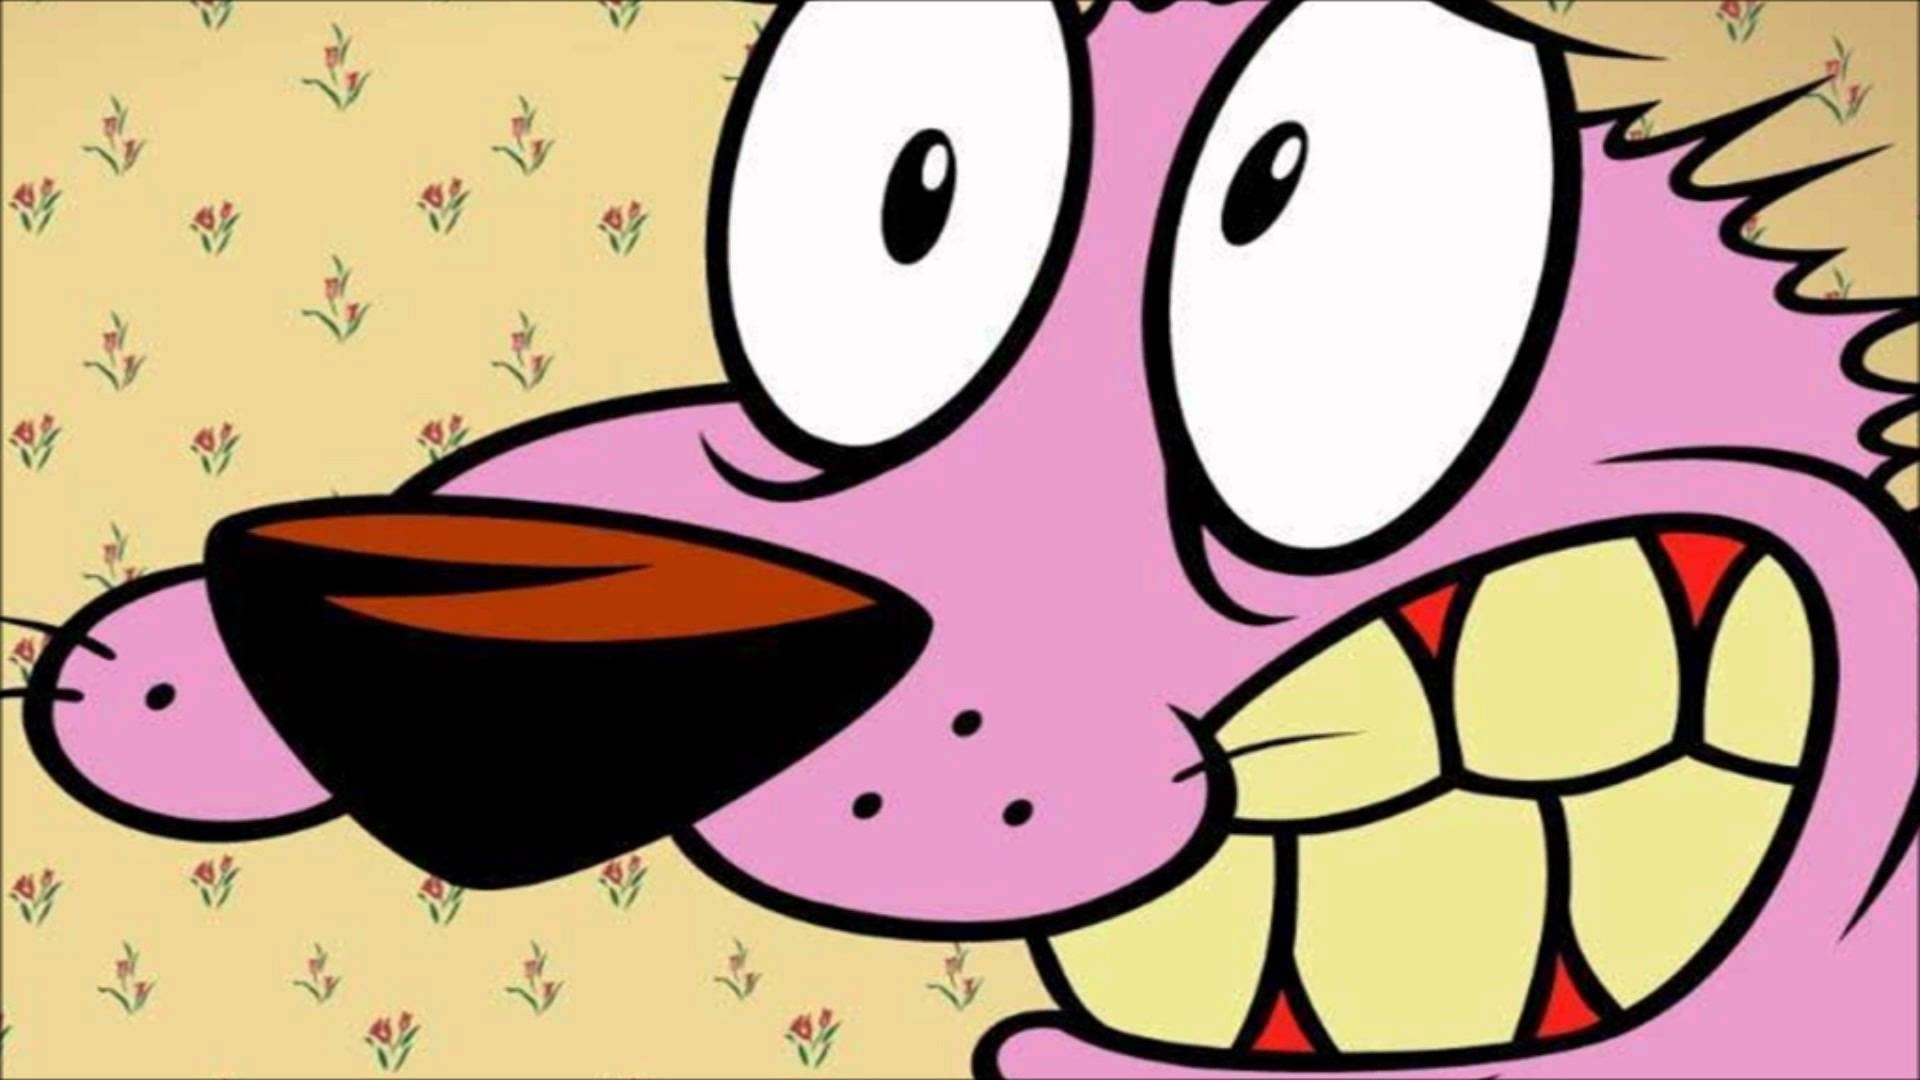 1920x1080 Courage, Courage the cowardly dog